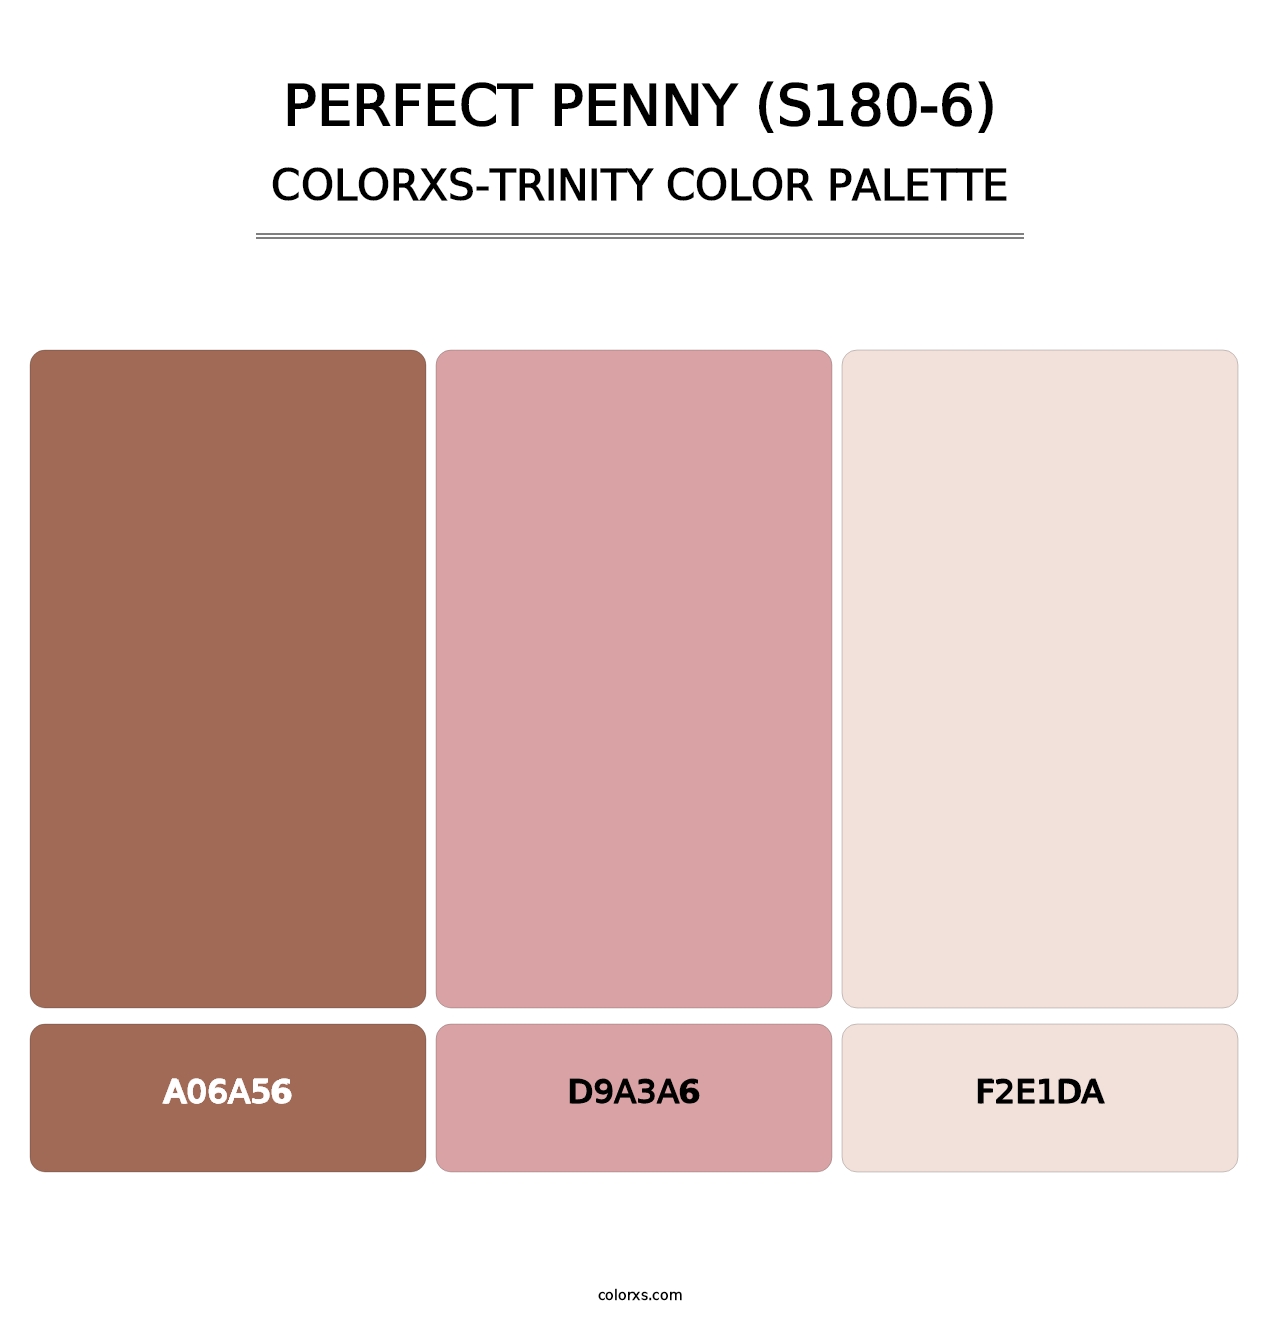 Perfect Penny (S180-6) - Colorxs Trinity Palette